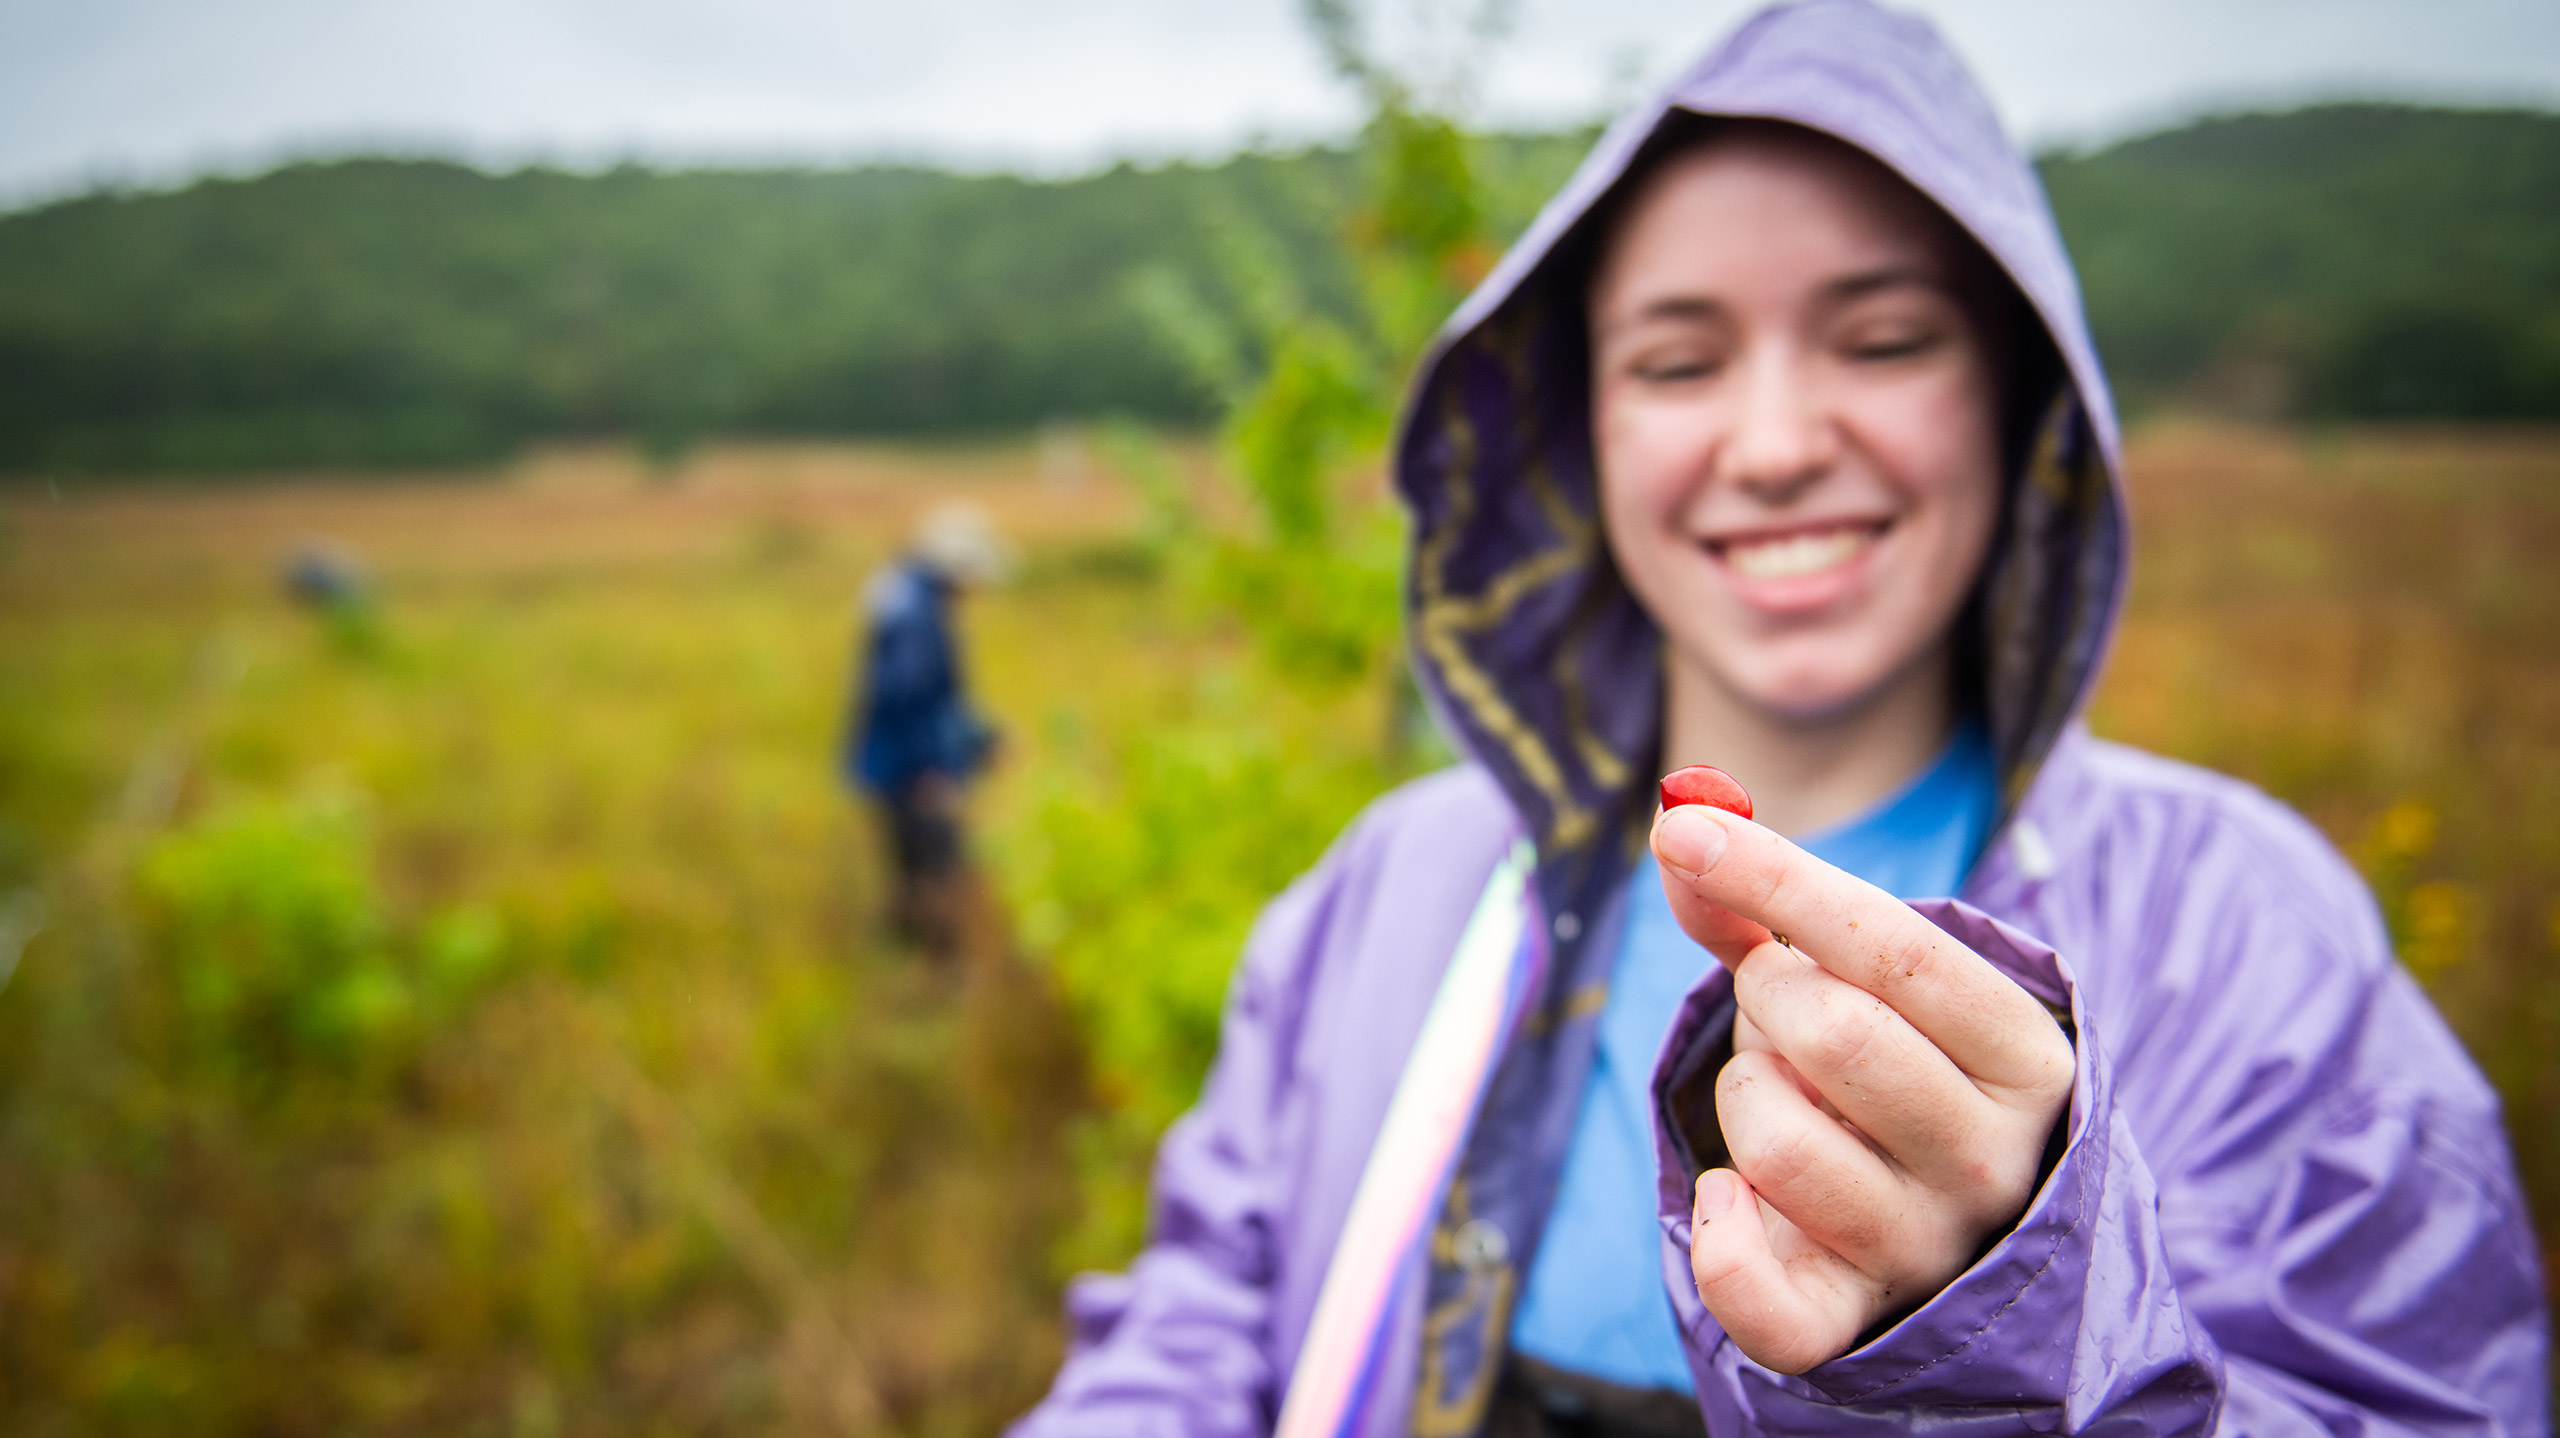 A student wearing a hooded rain jacket holds up a red berry during an ecological restoration project outing.